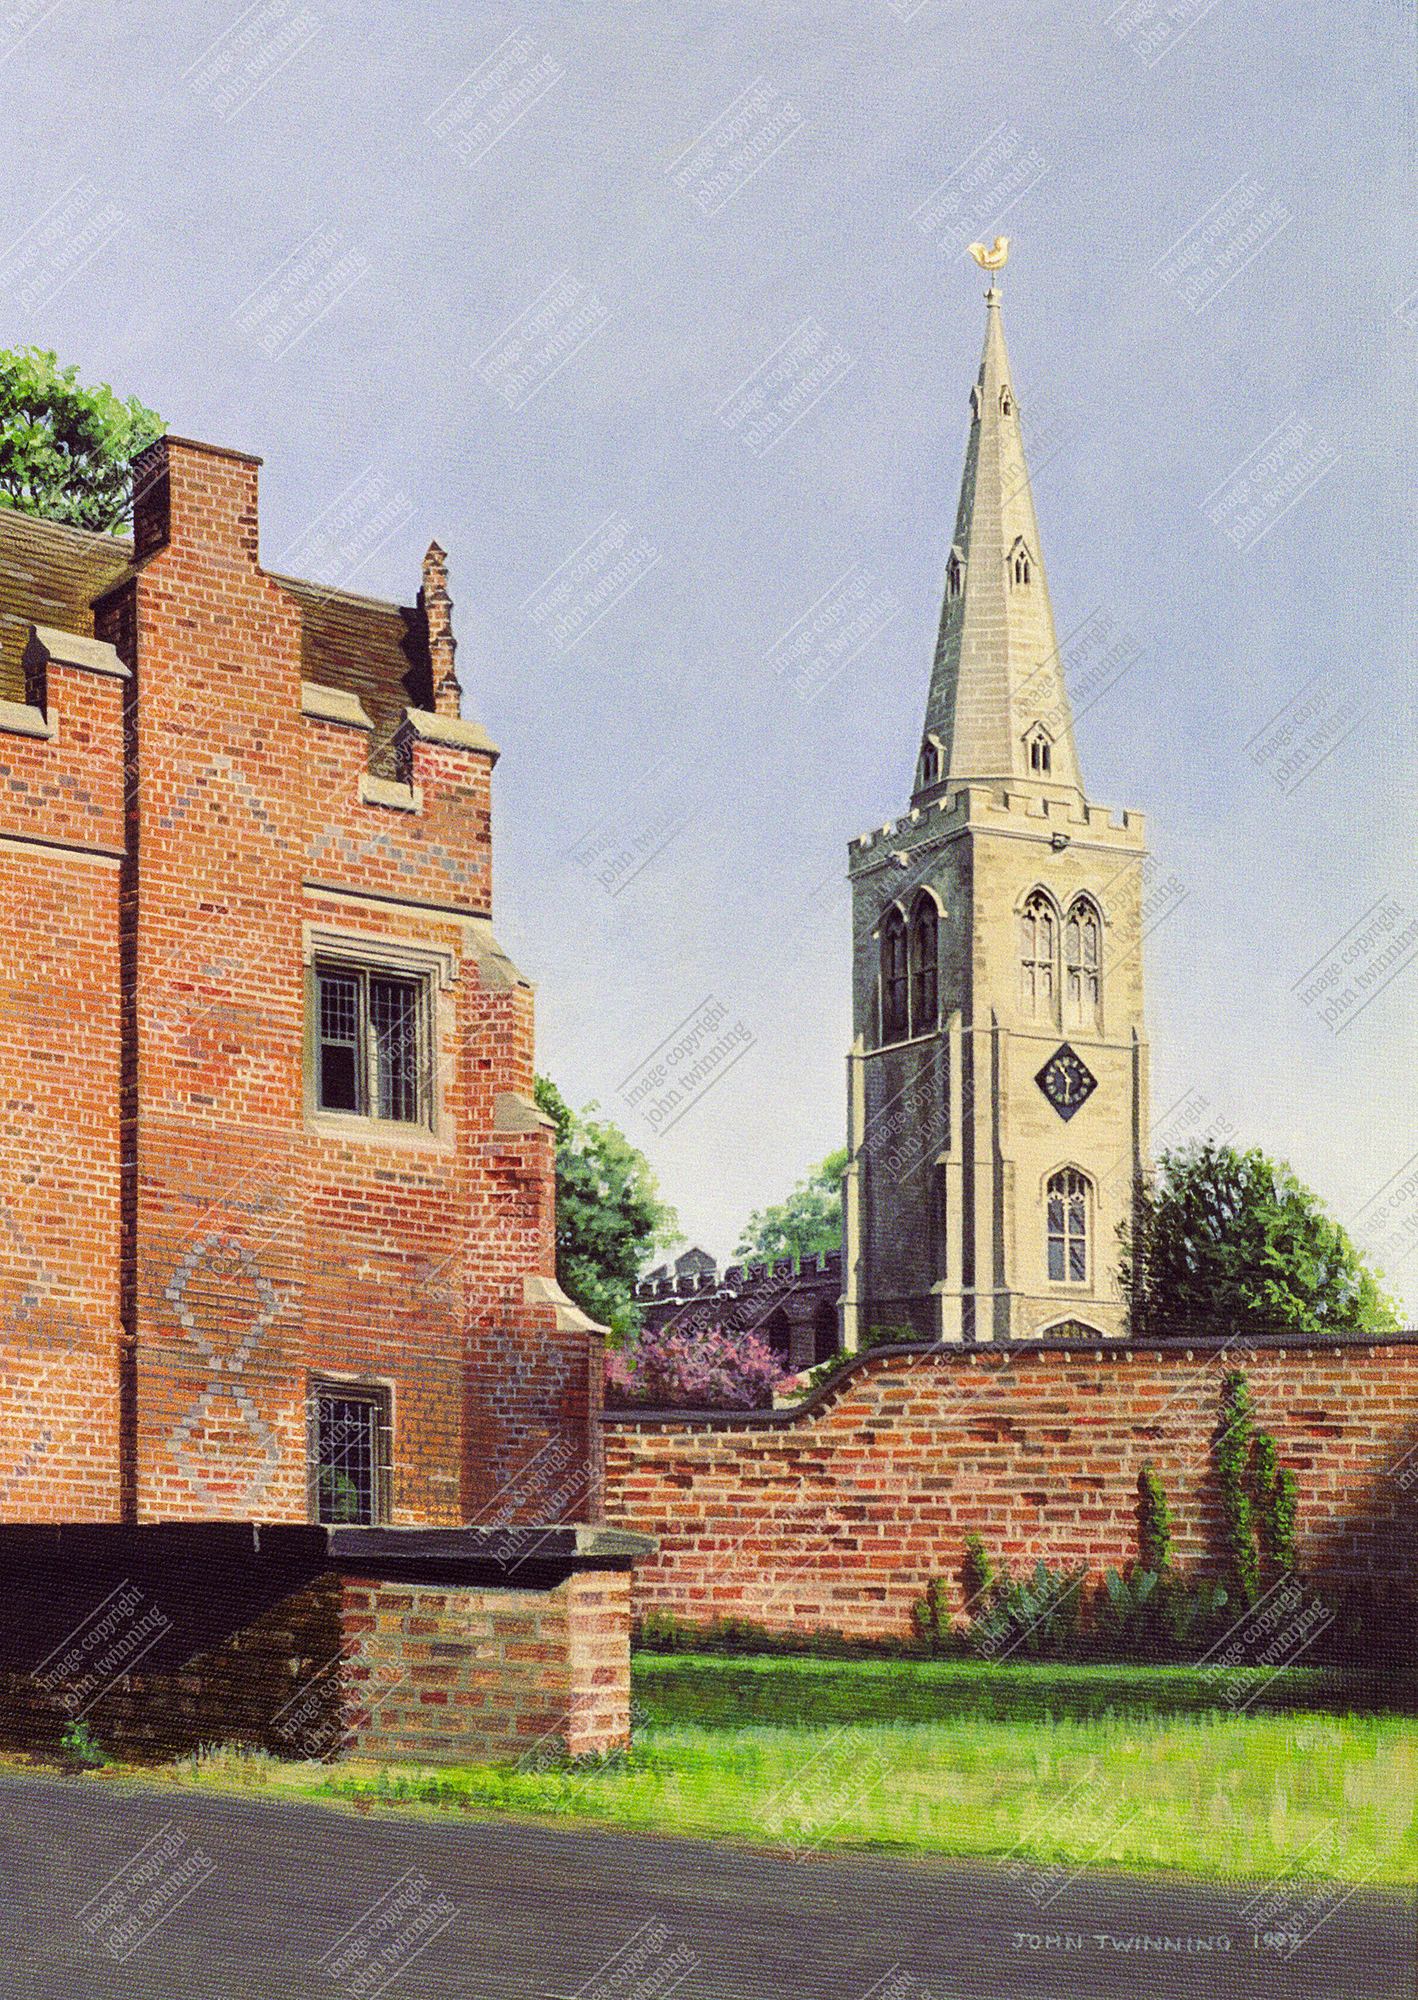 ‘St Mary’s from Buckden Towers’ – art print from a painting of this cambridgeshire village’s parish church